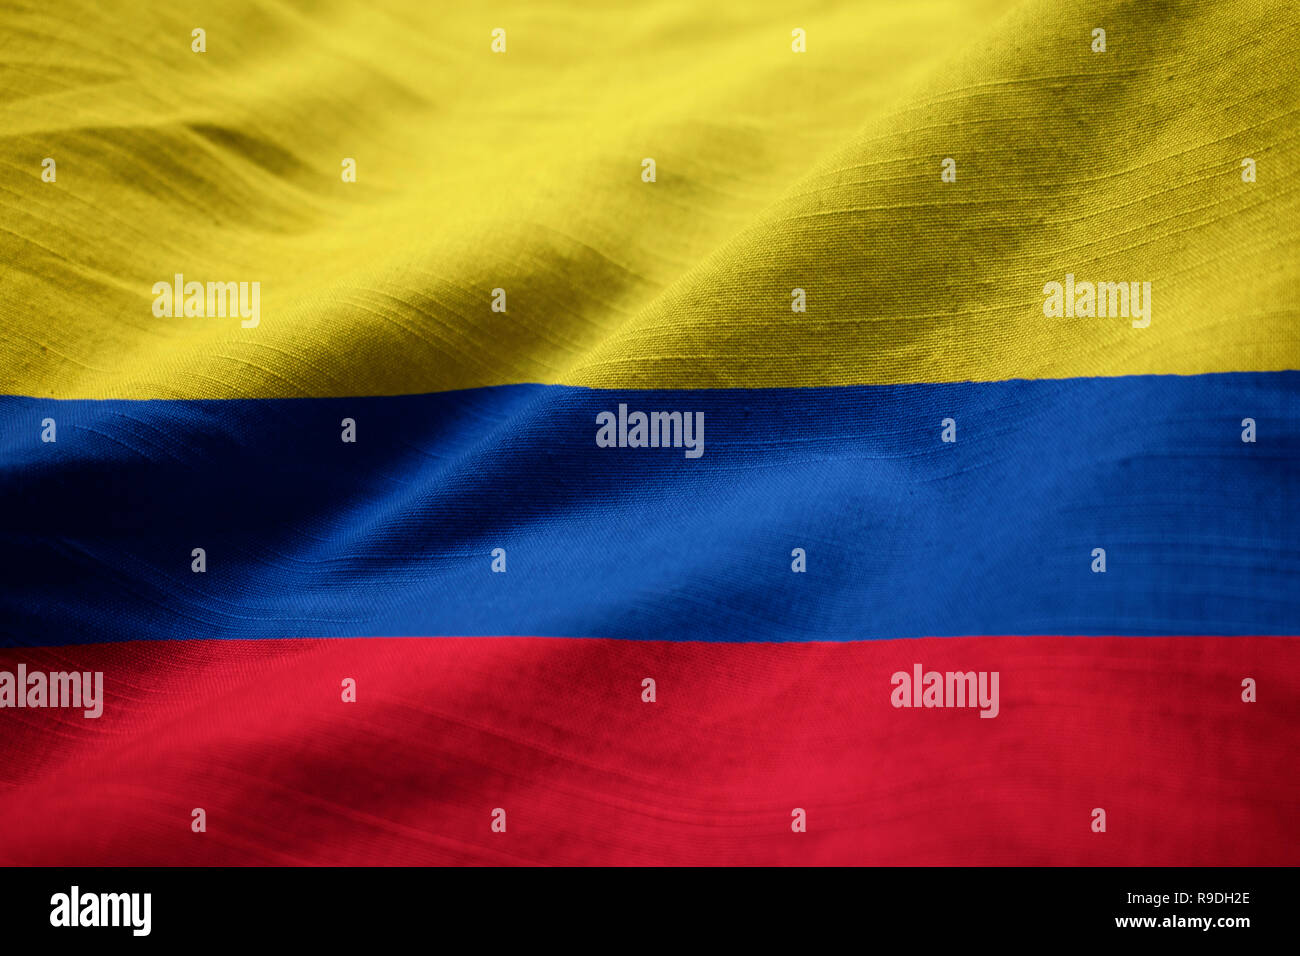 Closeup of Ruffled Colombia Flag, Colombia Flag Blowing in Wind Stock Photo